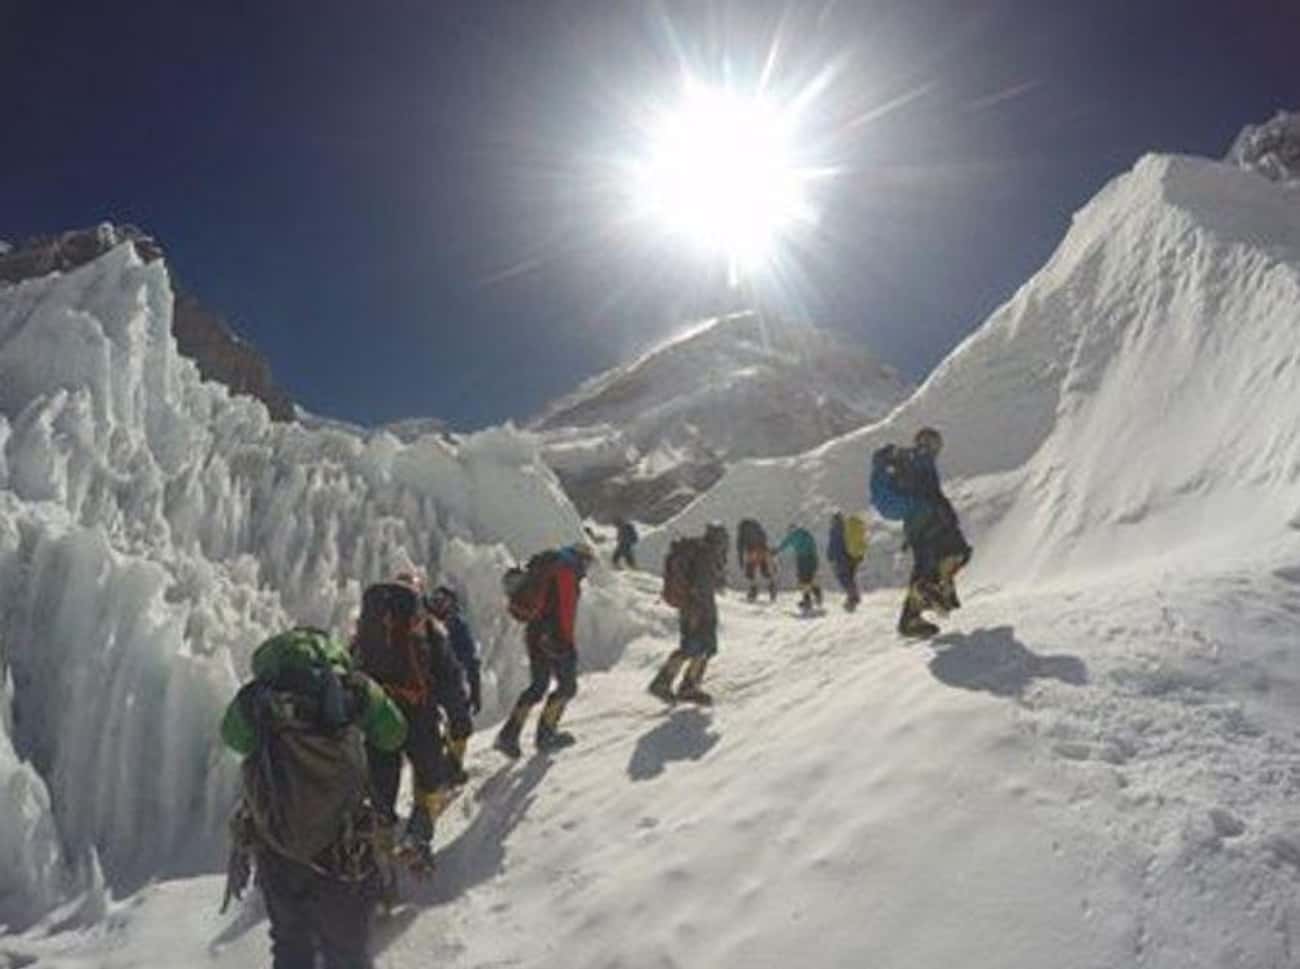 Four Separate Groups Tried To Reach The Summit